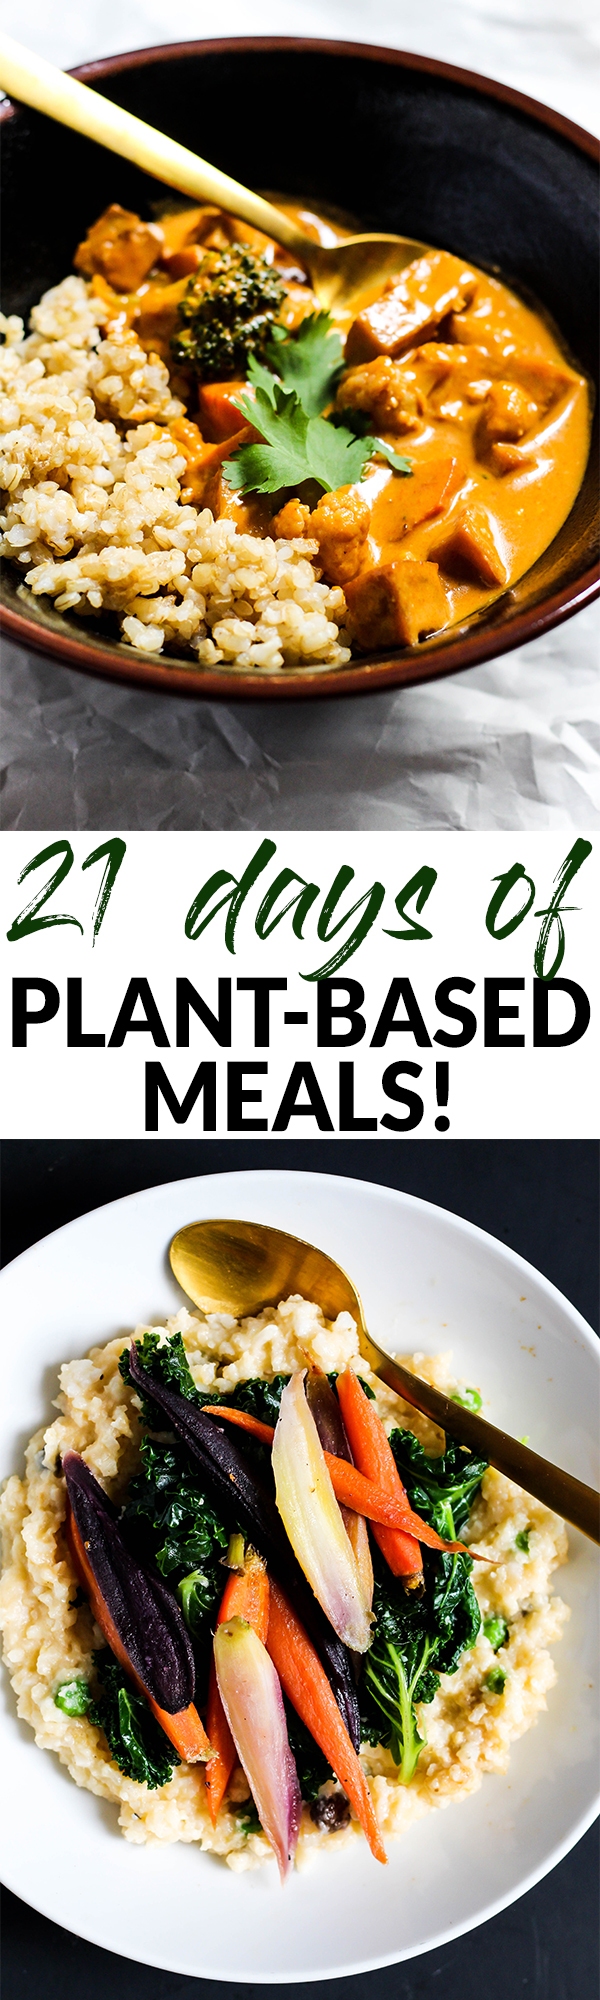 If you want to eat plant-based but don't know where to start, this 21-day challenge full of delicious meals and inspiration will kickstart your journey!